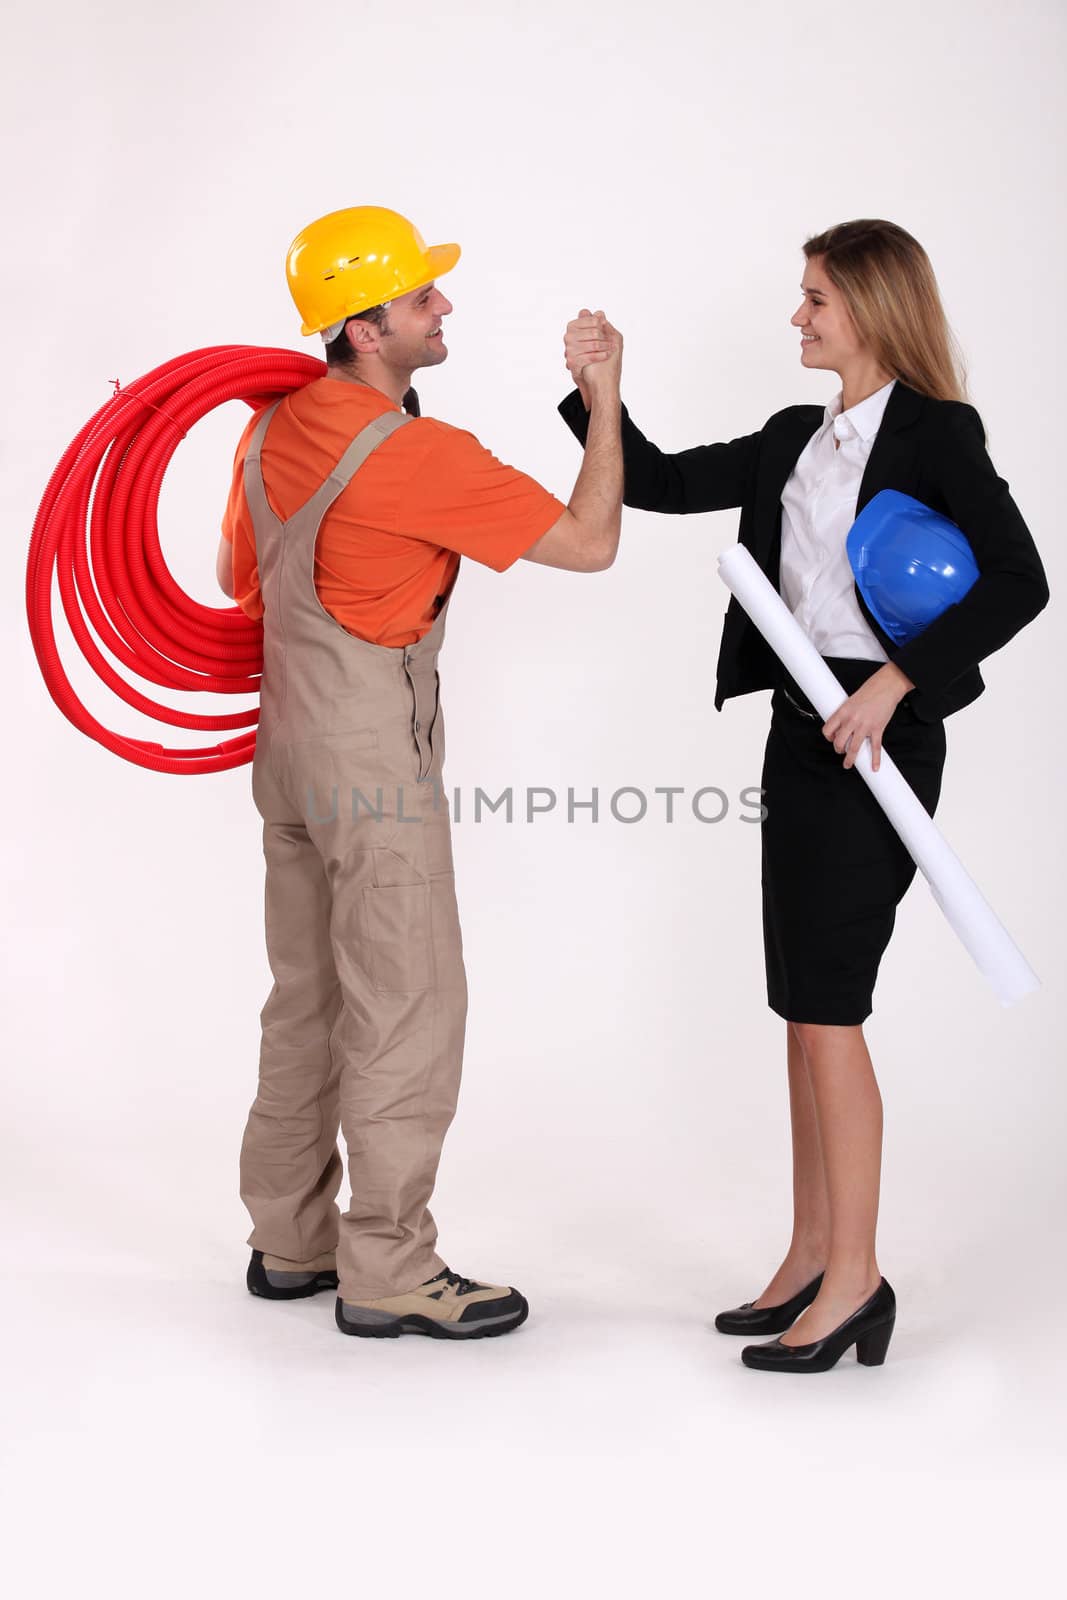 Architect and worker holding hands by phovoir